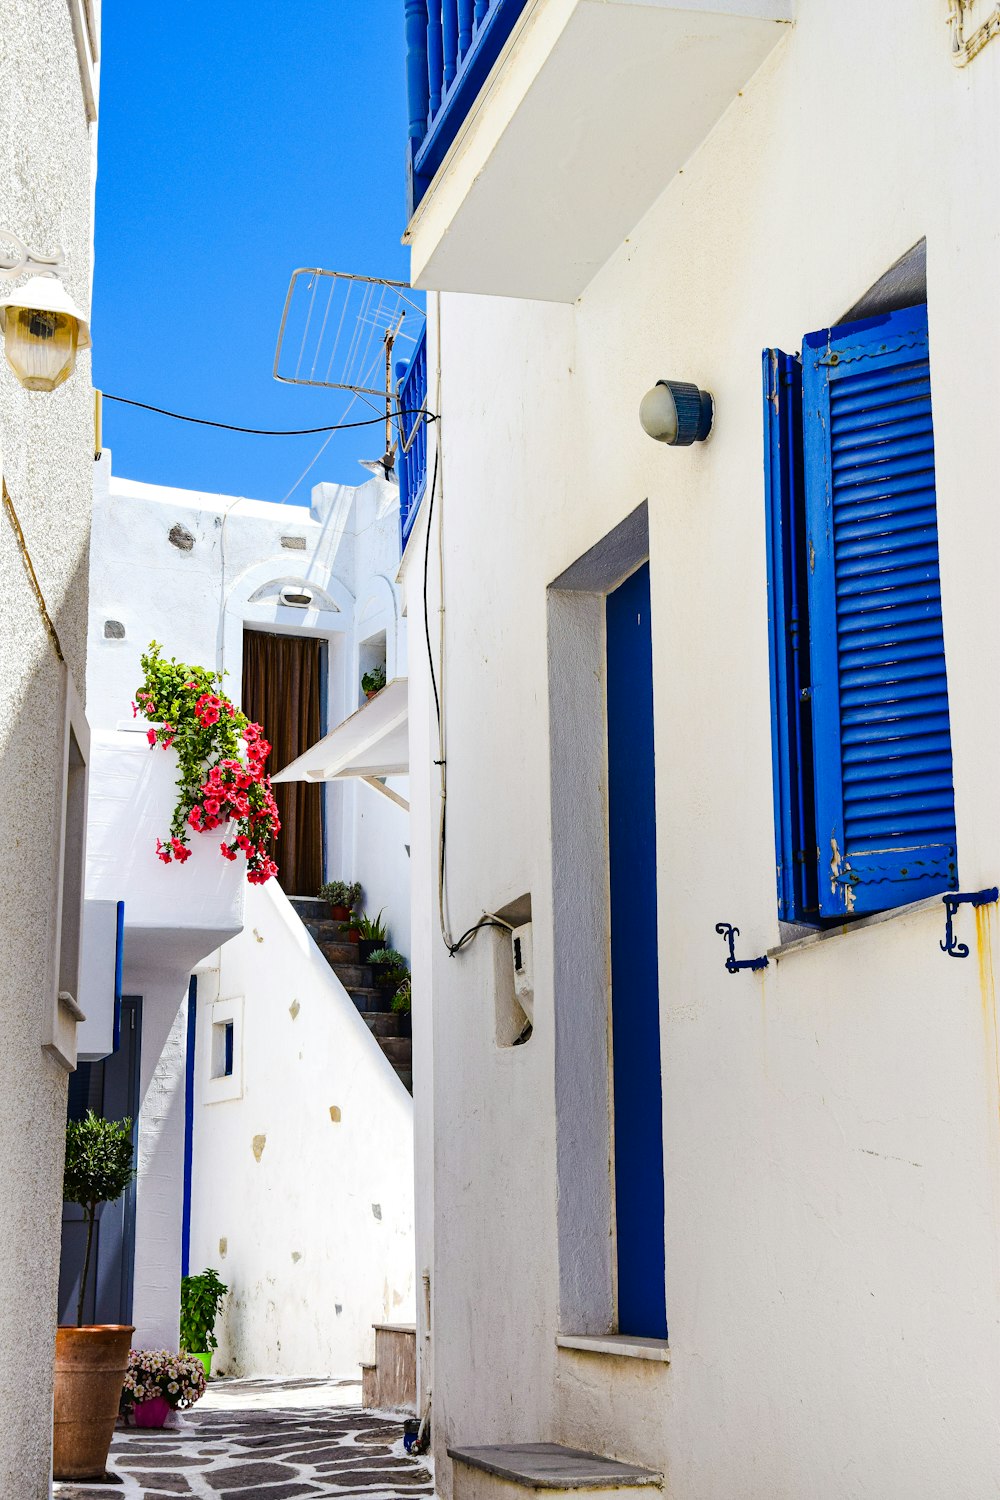 a narrow alleyway with blue shutters and flowers